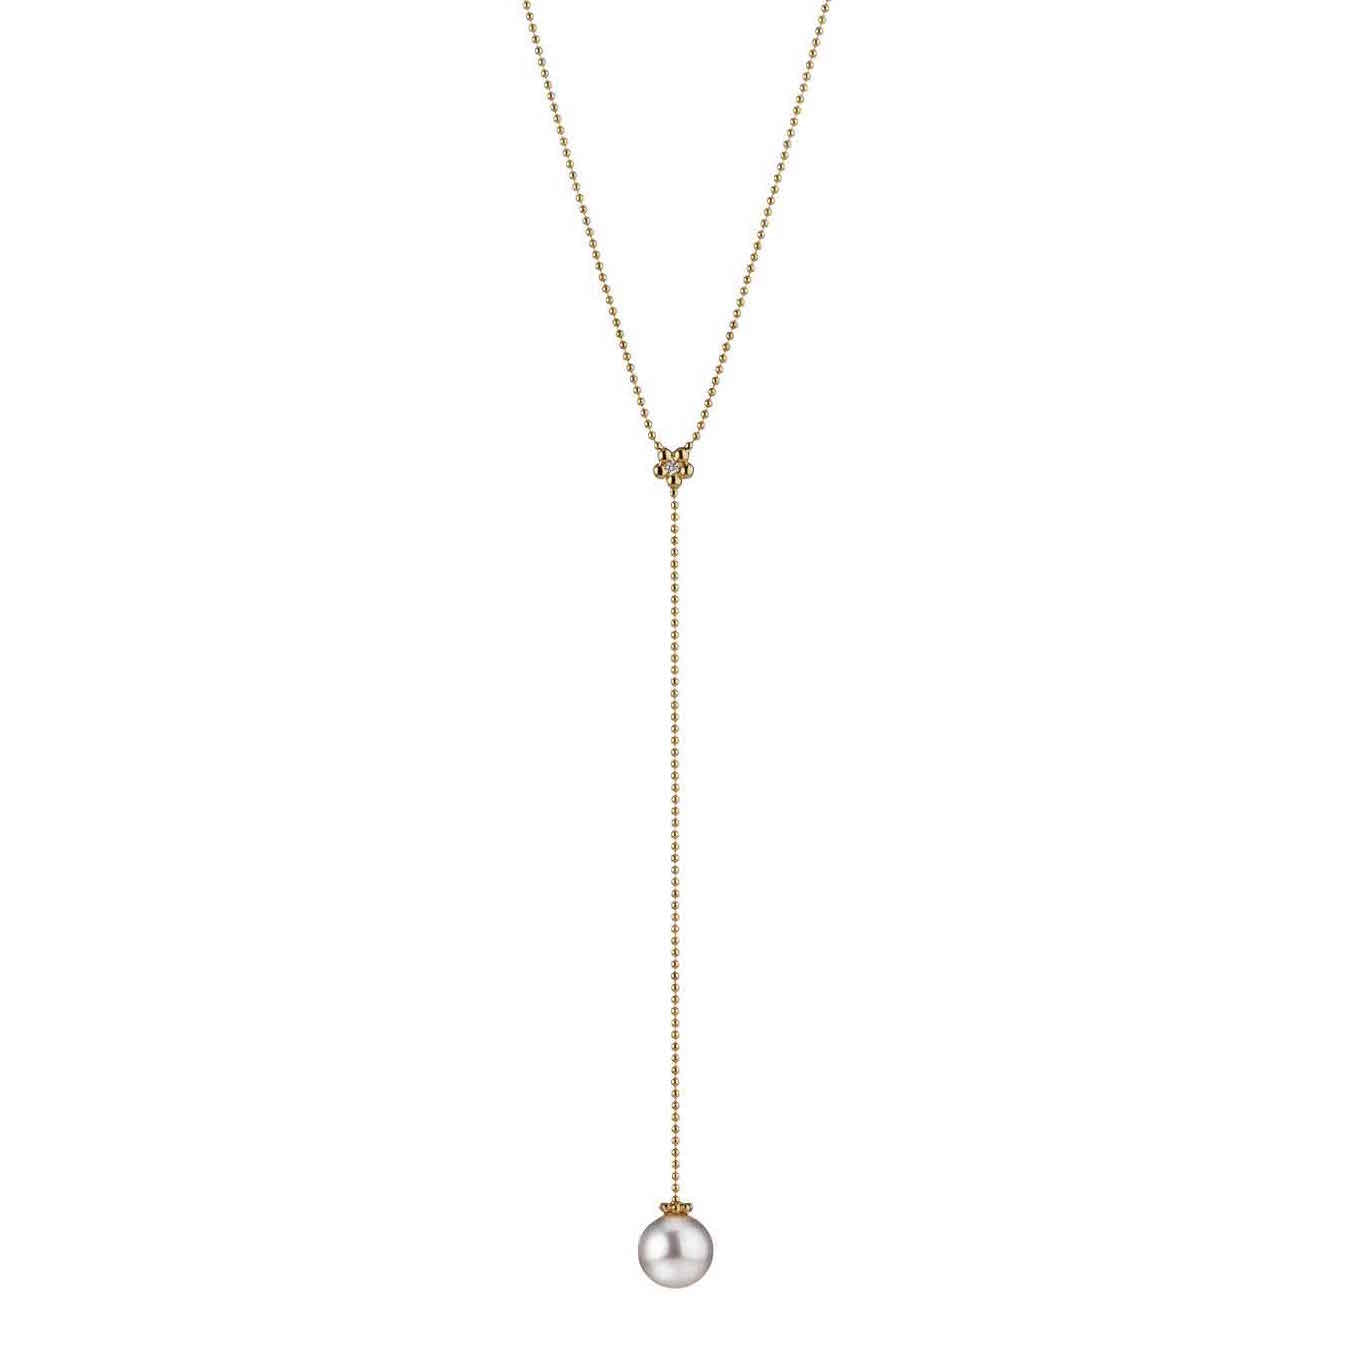 Rose Gold Long Necklace with Pearl Drop